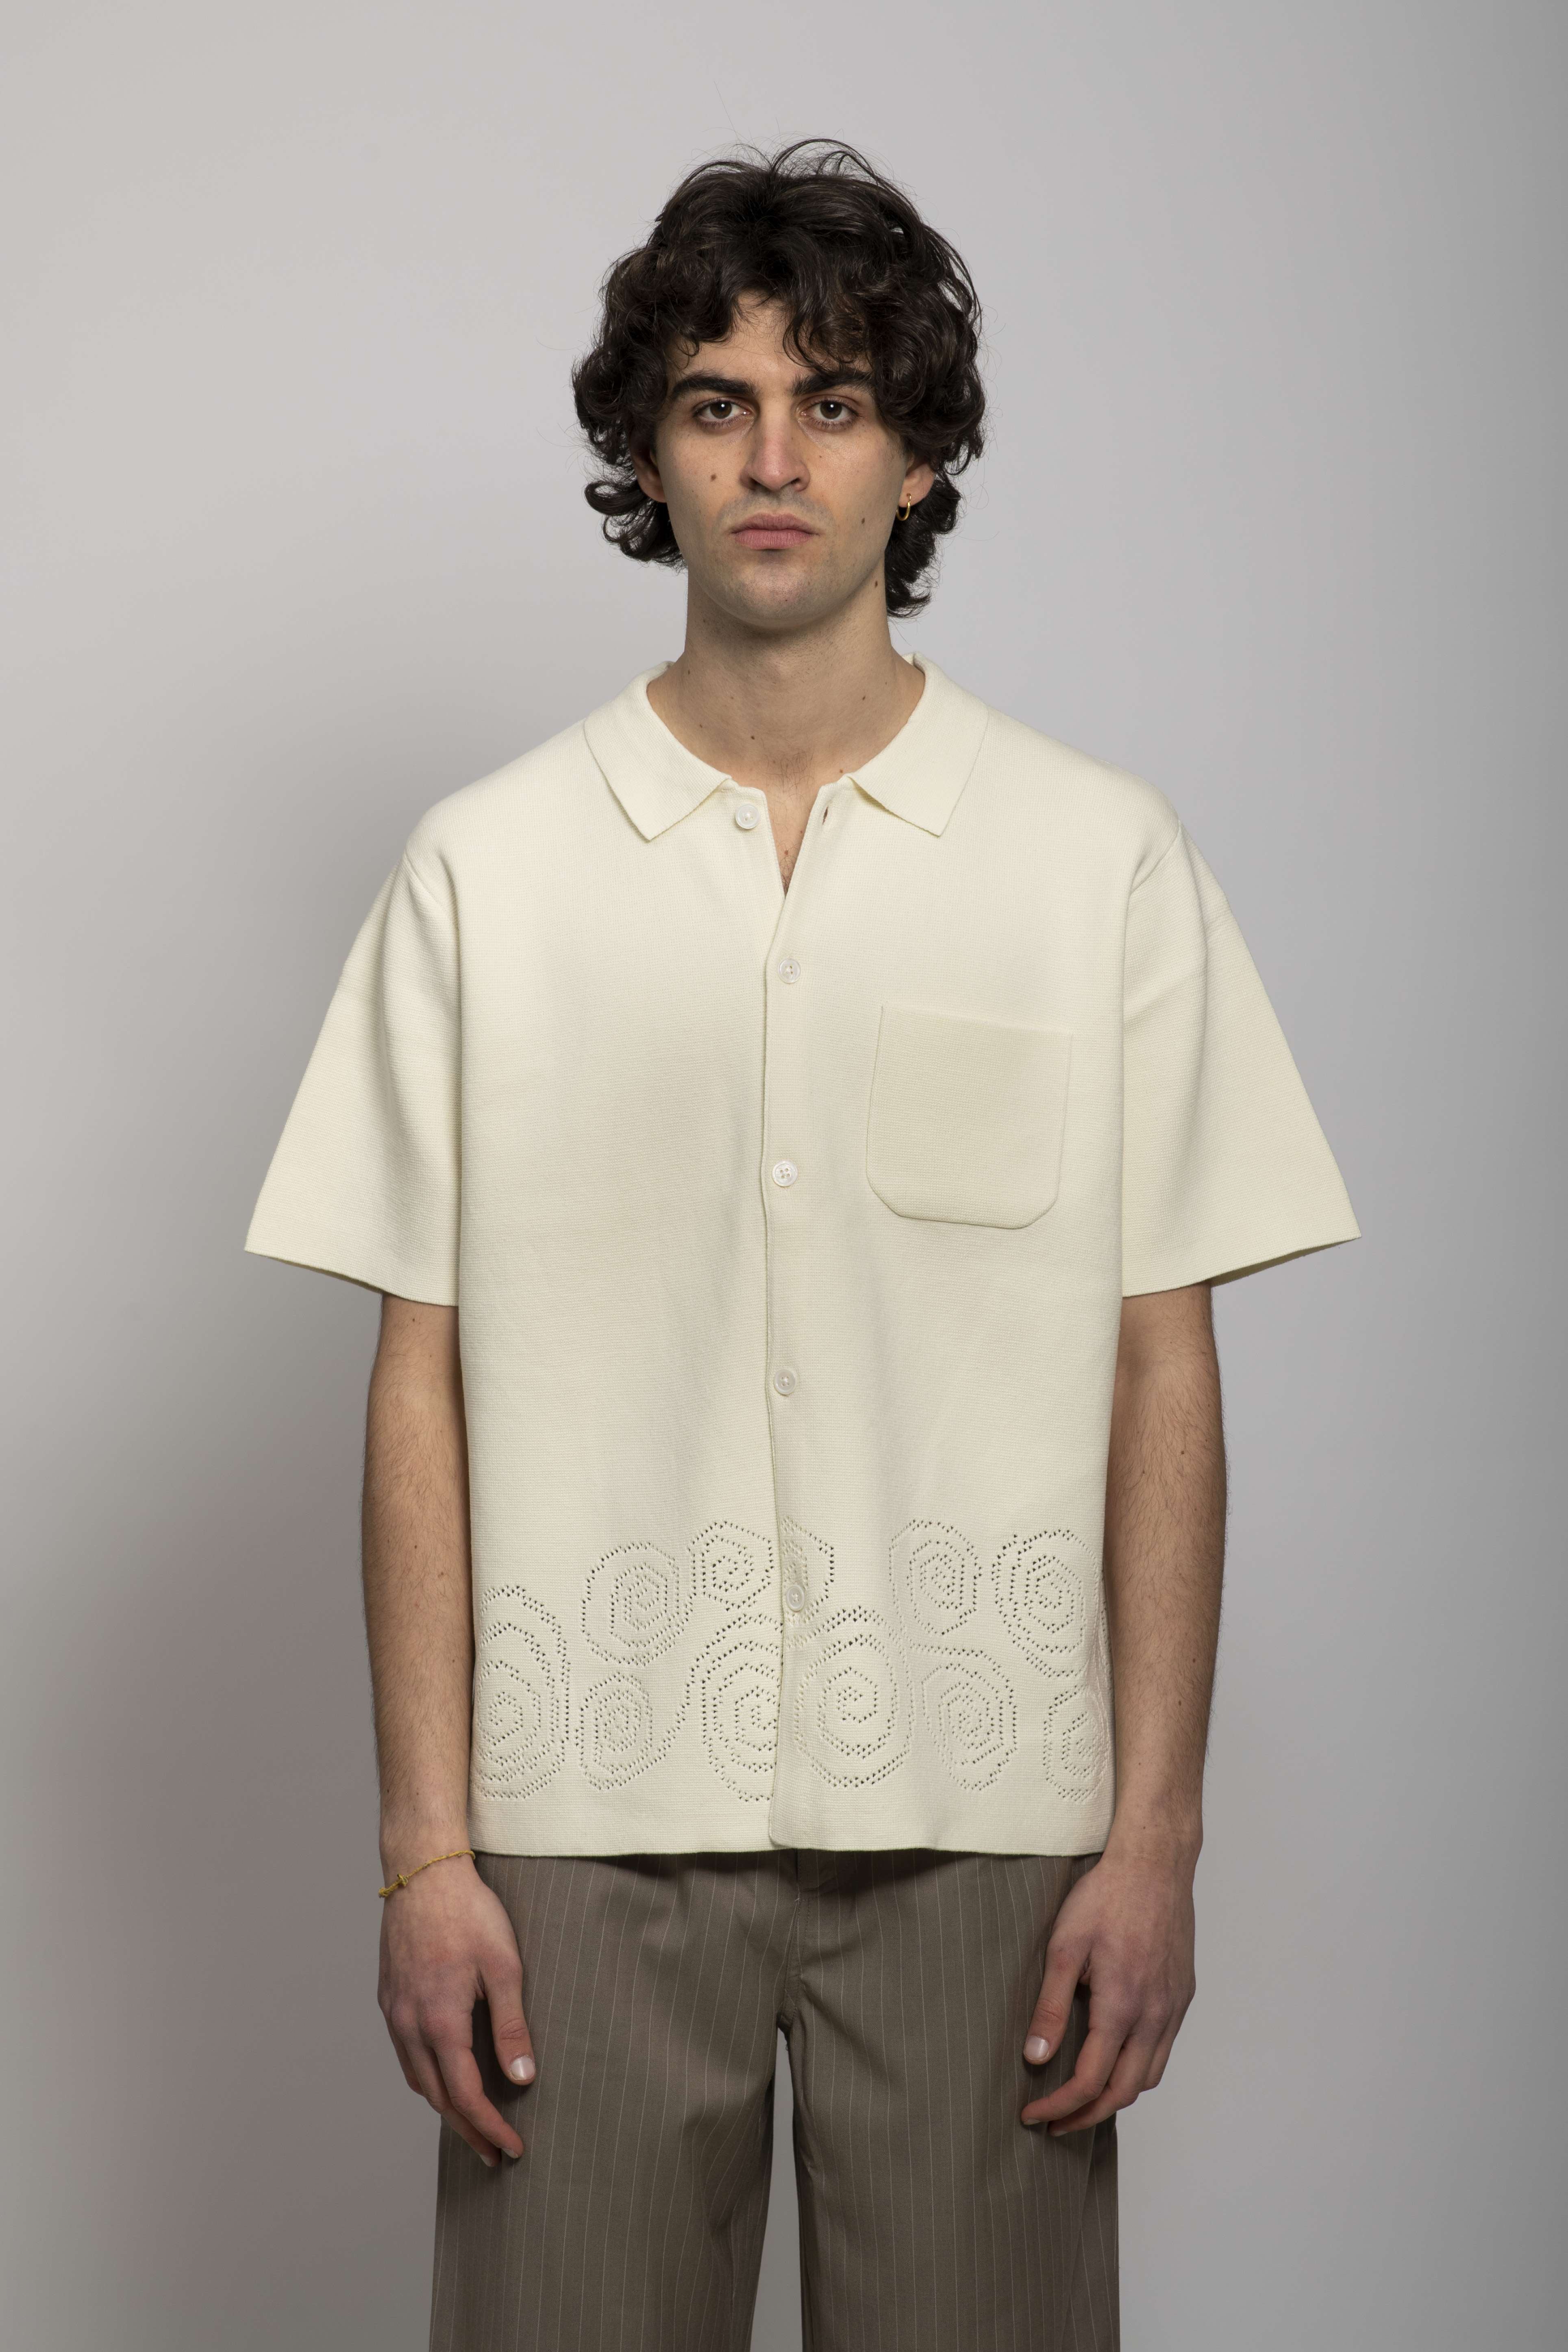 Norse Store  Shipping Worldwide - Stüssy Perforated Swirl Knit Shirt -  Natural